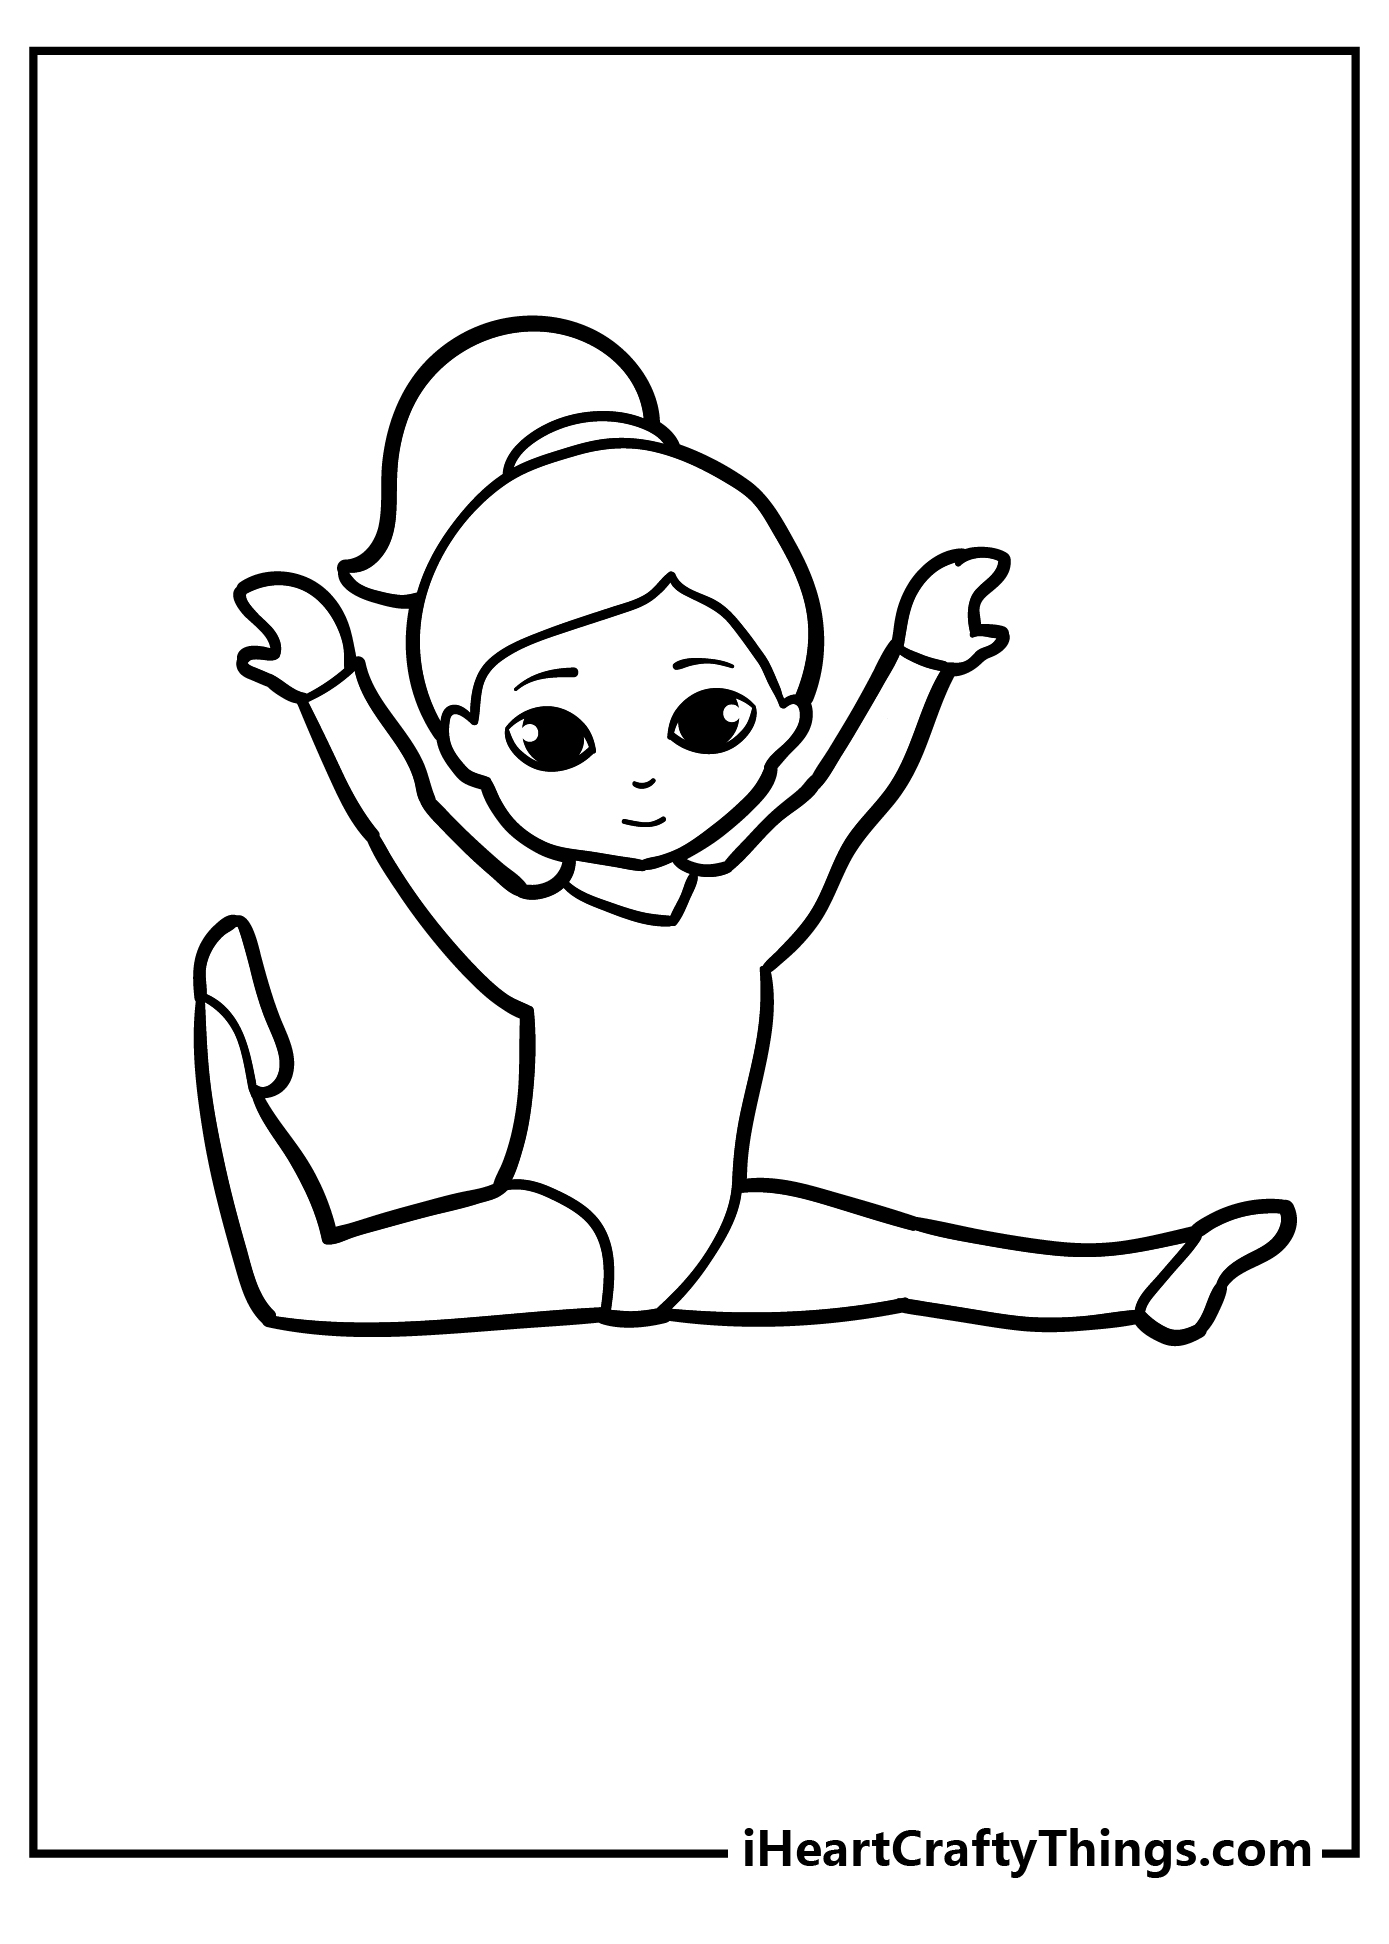 Printable Gymnastics Coloring Pages Updated 20